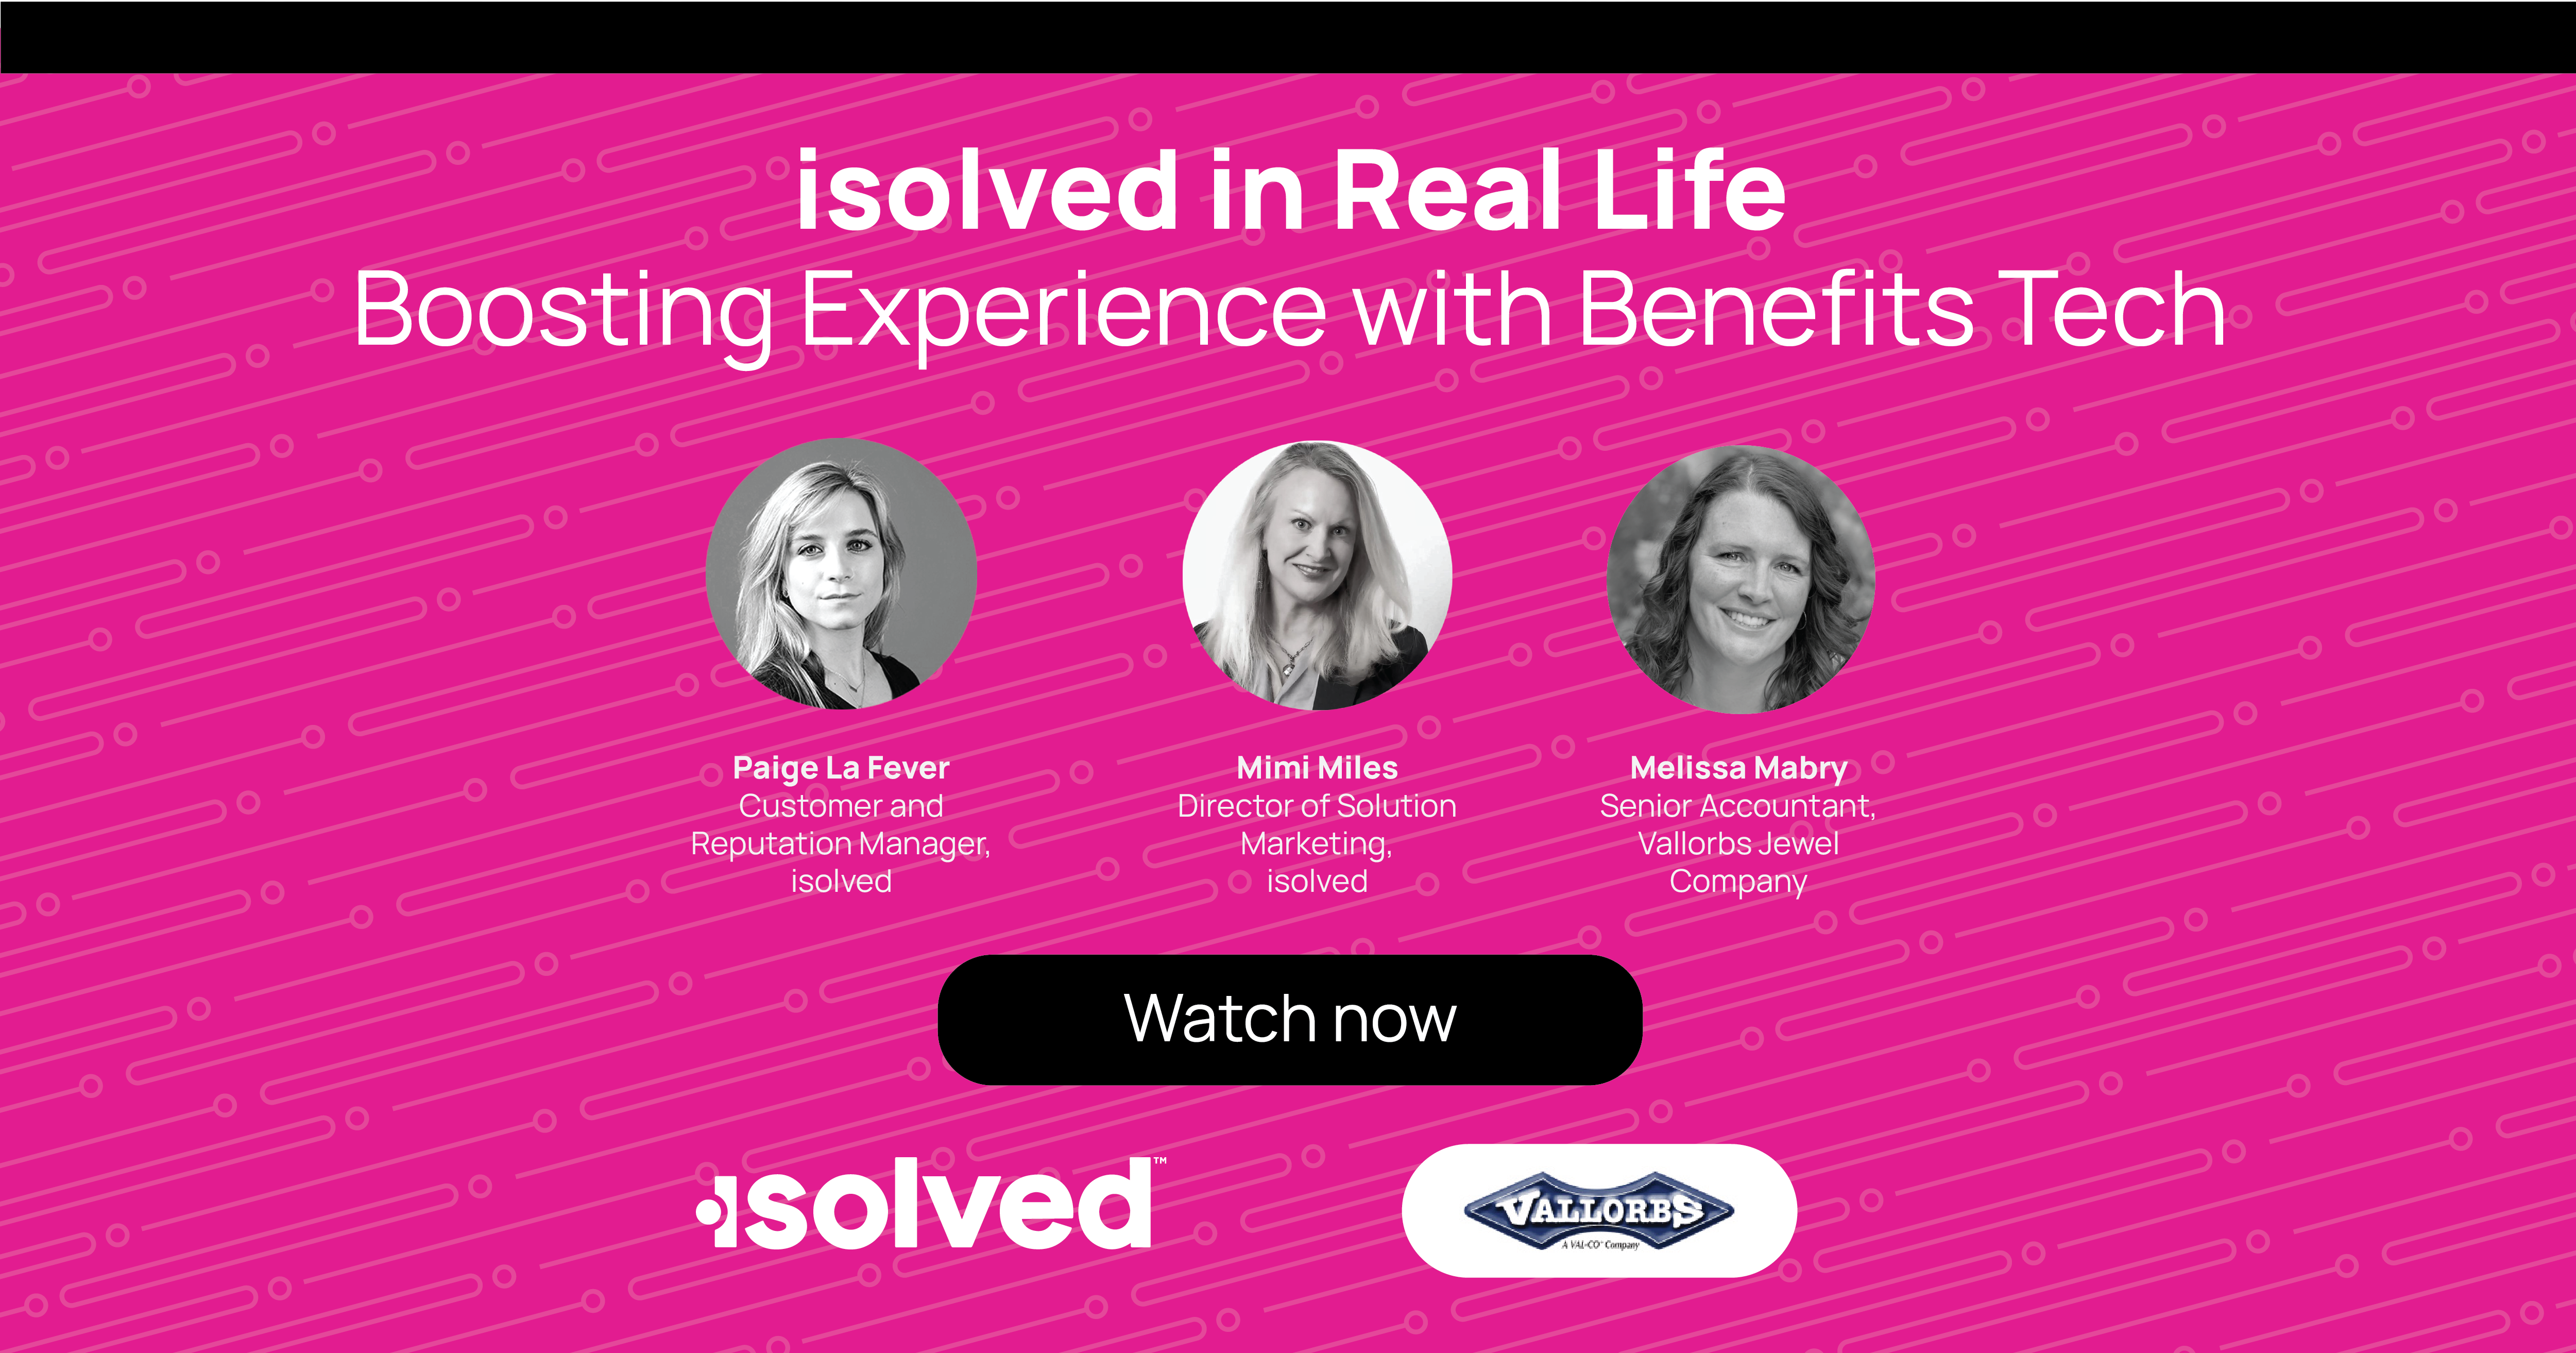 In Real Life: Boosting Experience with Benefits Tech